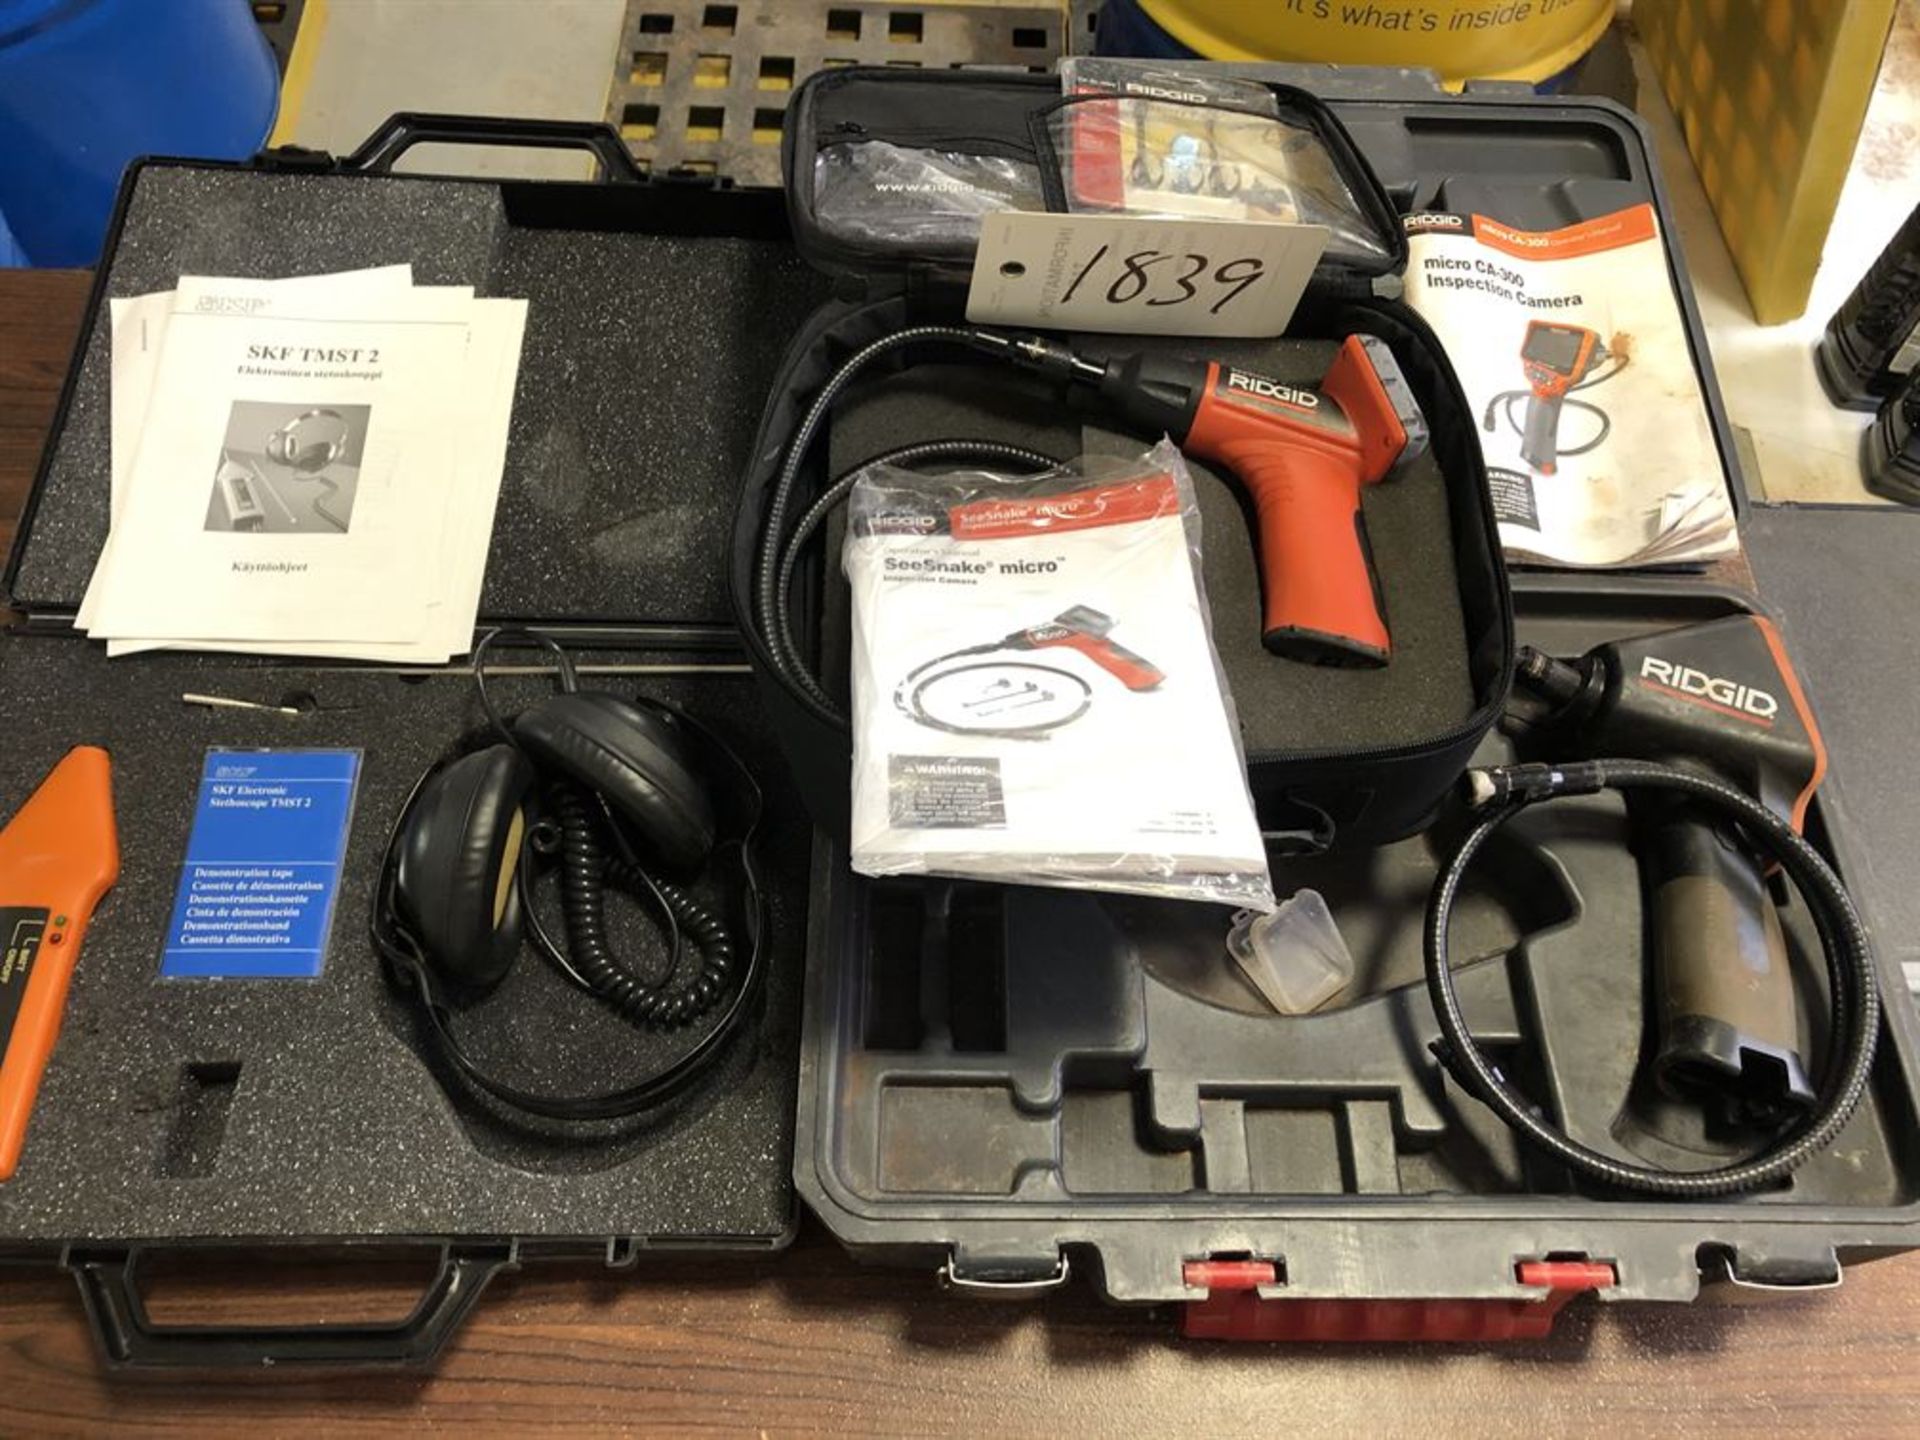 Lot Comprising of (1) SKF TMST 2 Electronic Stethoscope, (2) RIGID Micro Inspection Cameras (